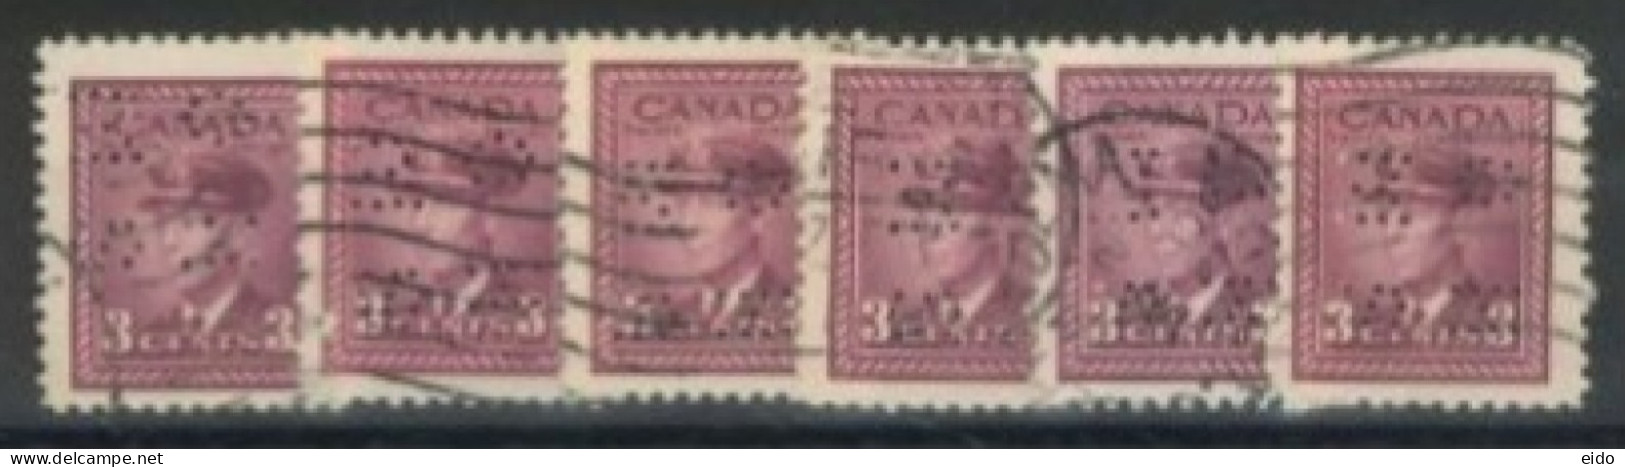 CANADA - 1942, KING GEORGE VI IN NAVAL UNIFORM STAMPS QTY. OF 6, WITH REDUCED SPECIAL PRICE, USED. - Gebraucht